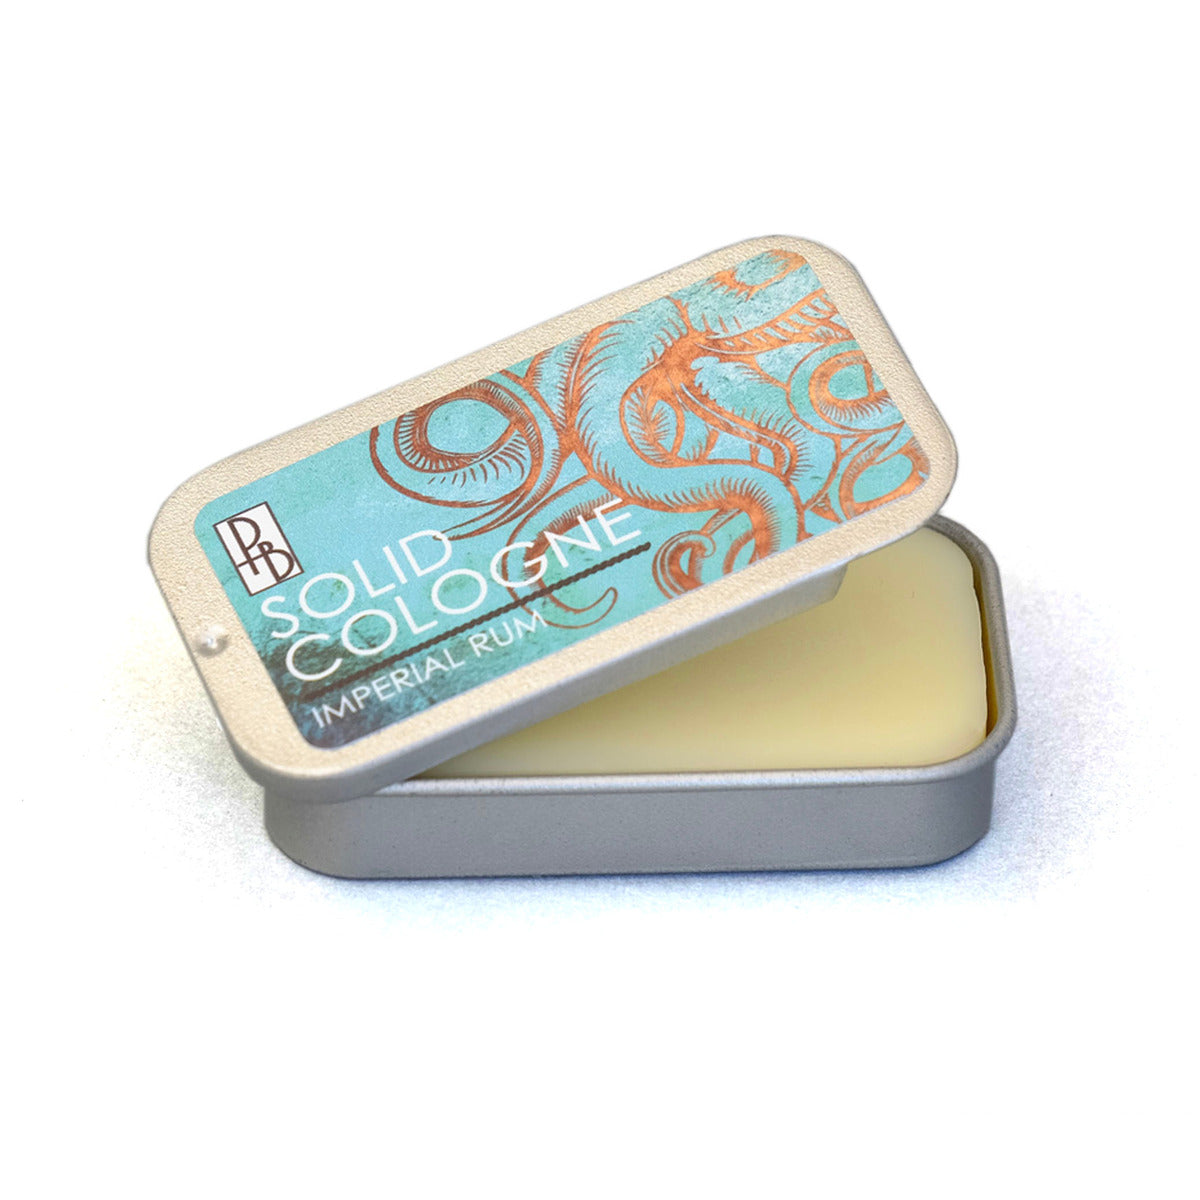 Phoenix & Beau Imperial Rum Solid Cologne 12g